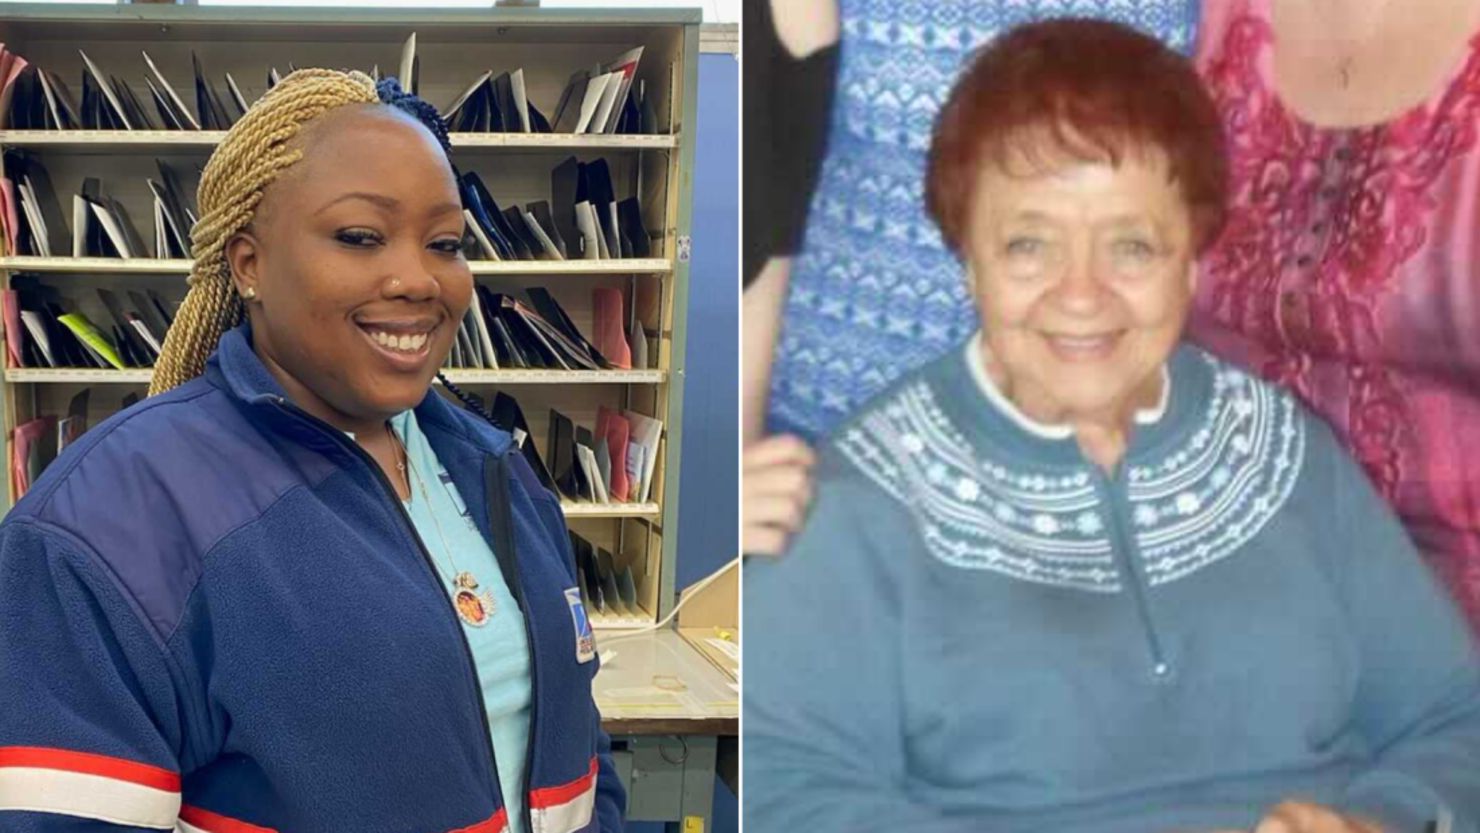 A USPS mail carrier in Chicago helped save the life of an elderly woman who fell and couldn't call for help. 